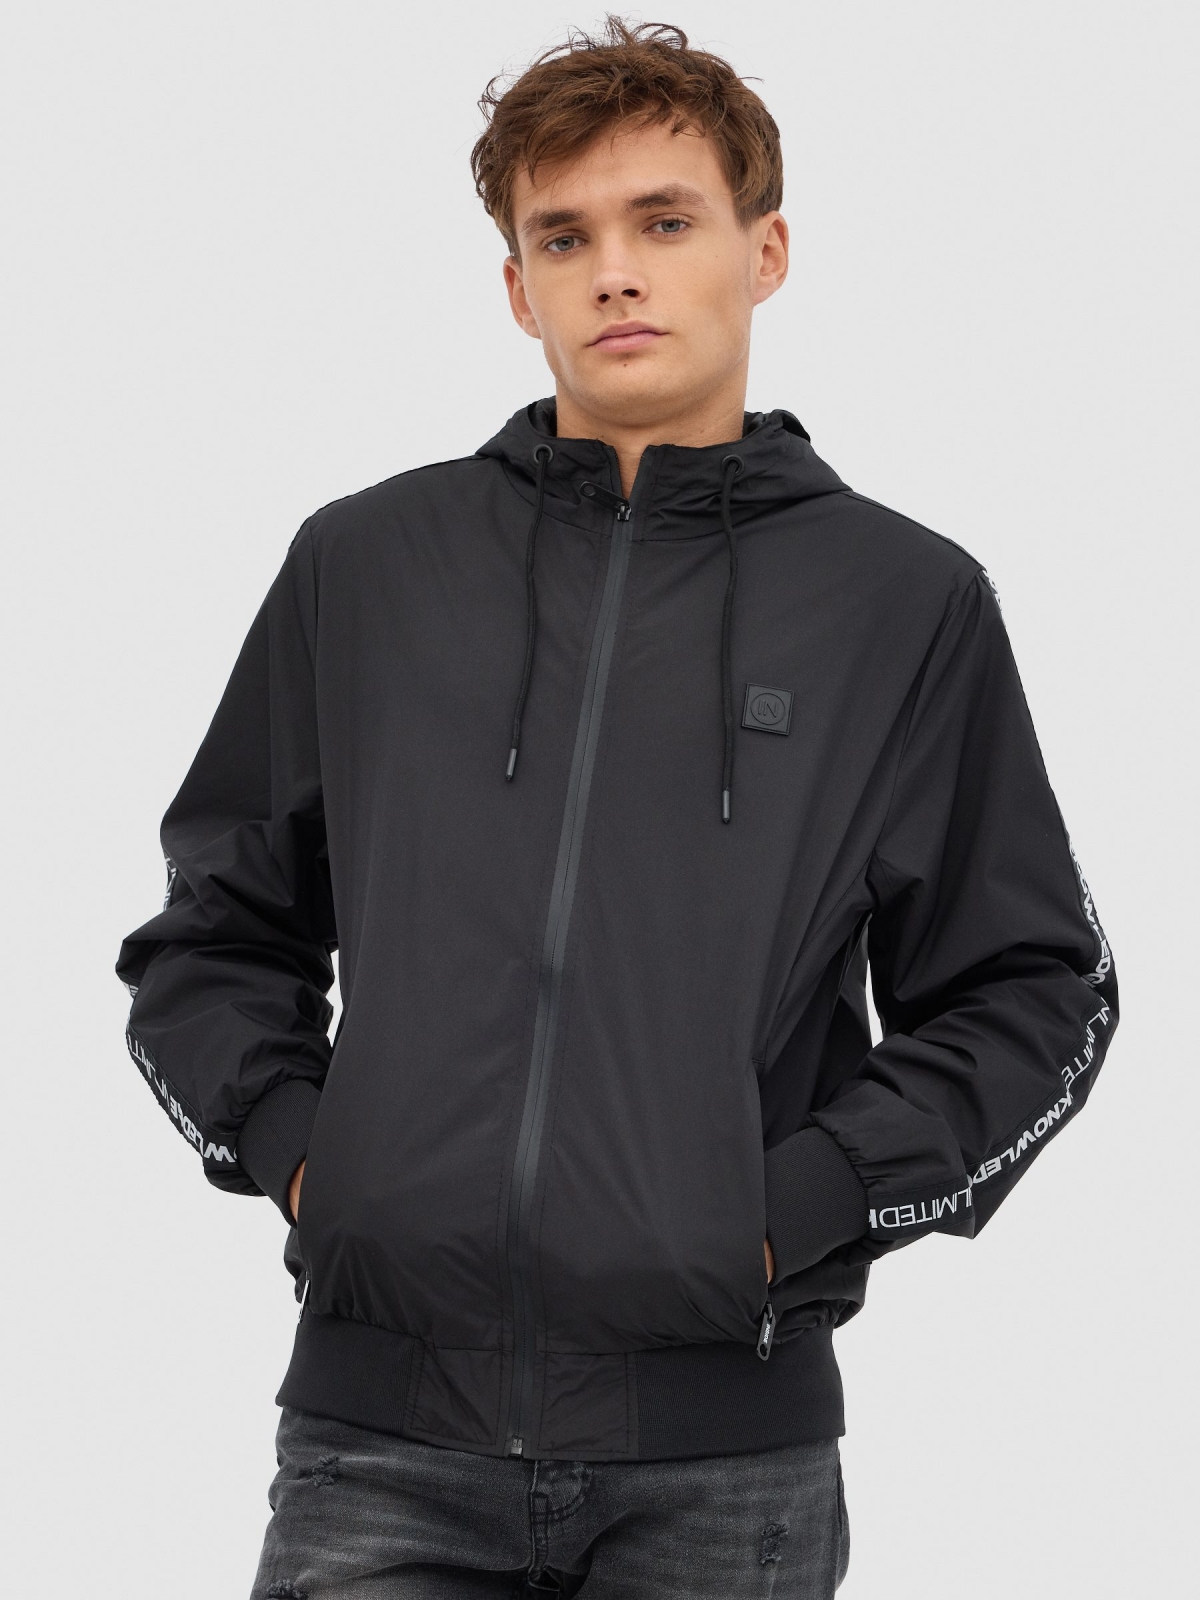 Open jacket with text black middle front view